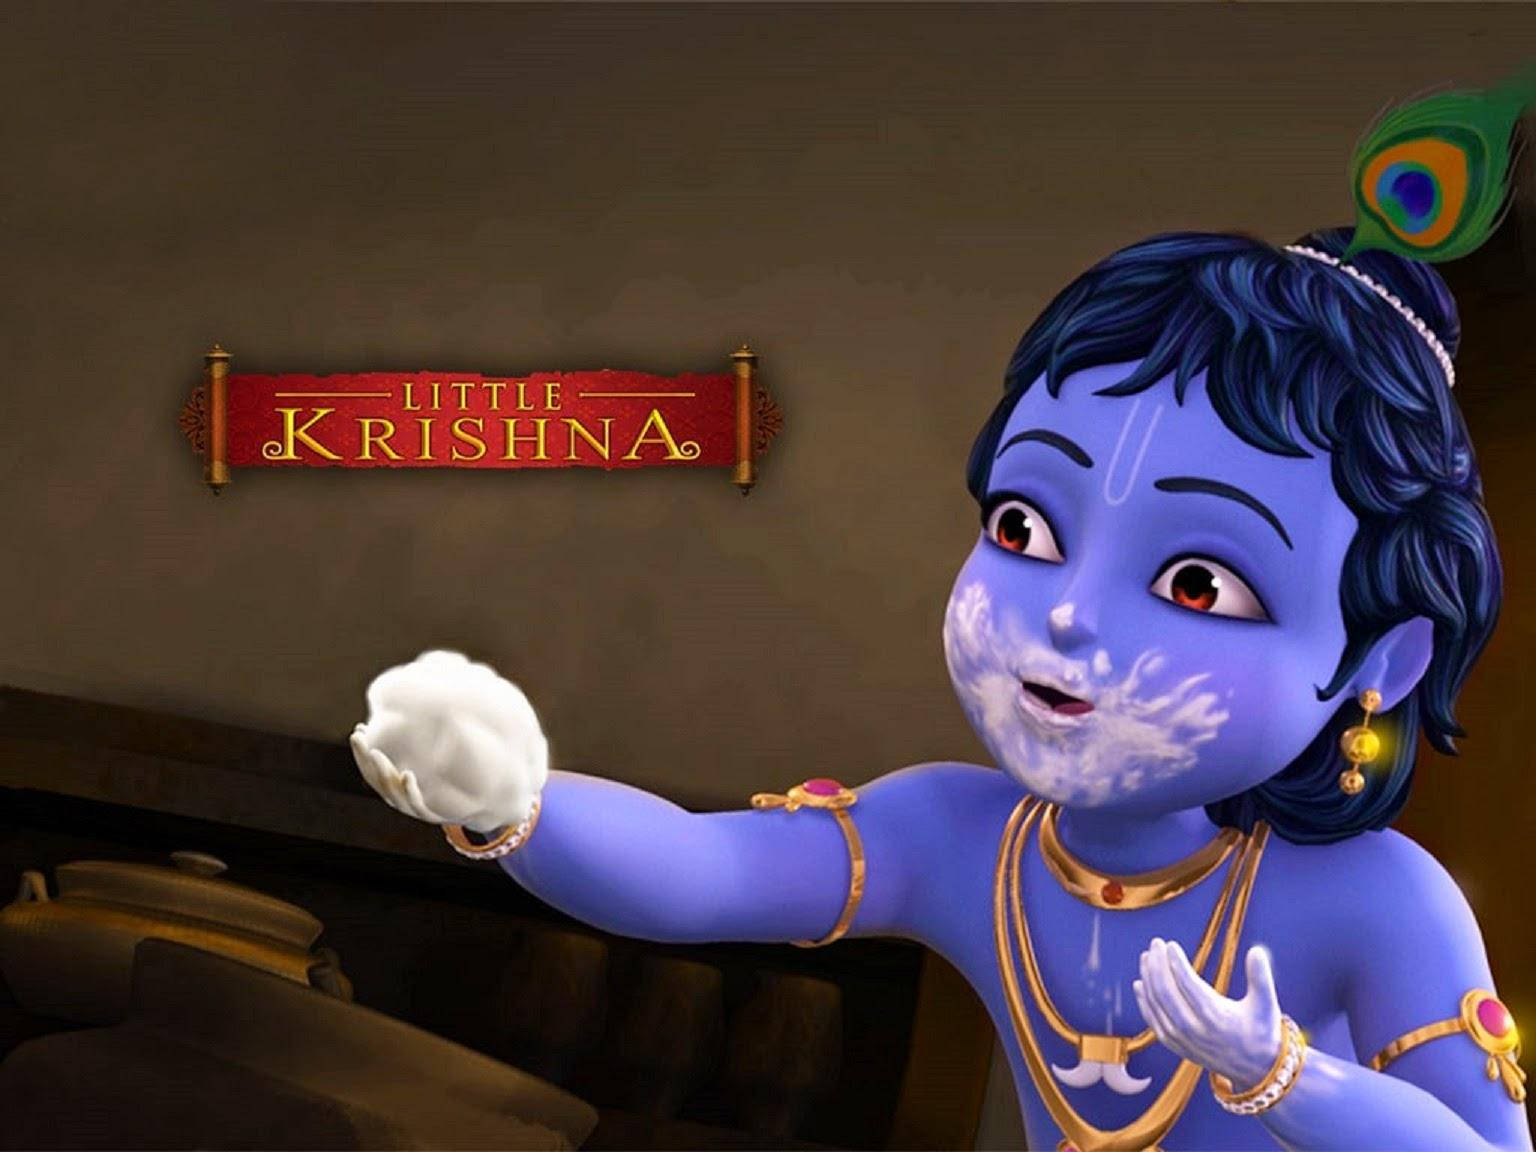 Adorable Little Krishna - Hd Image Holding A Butter Ball. Background